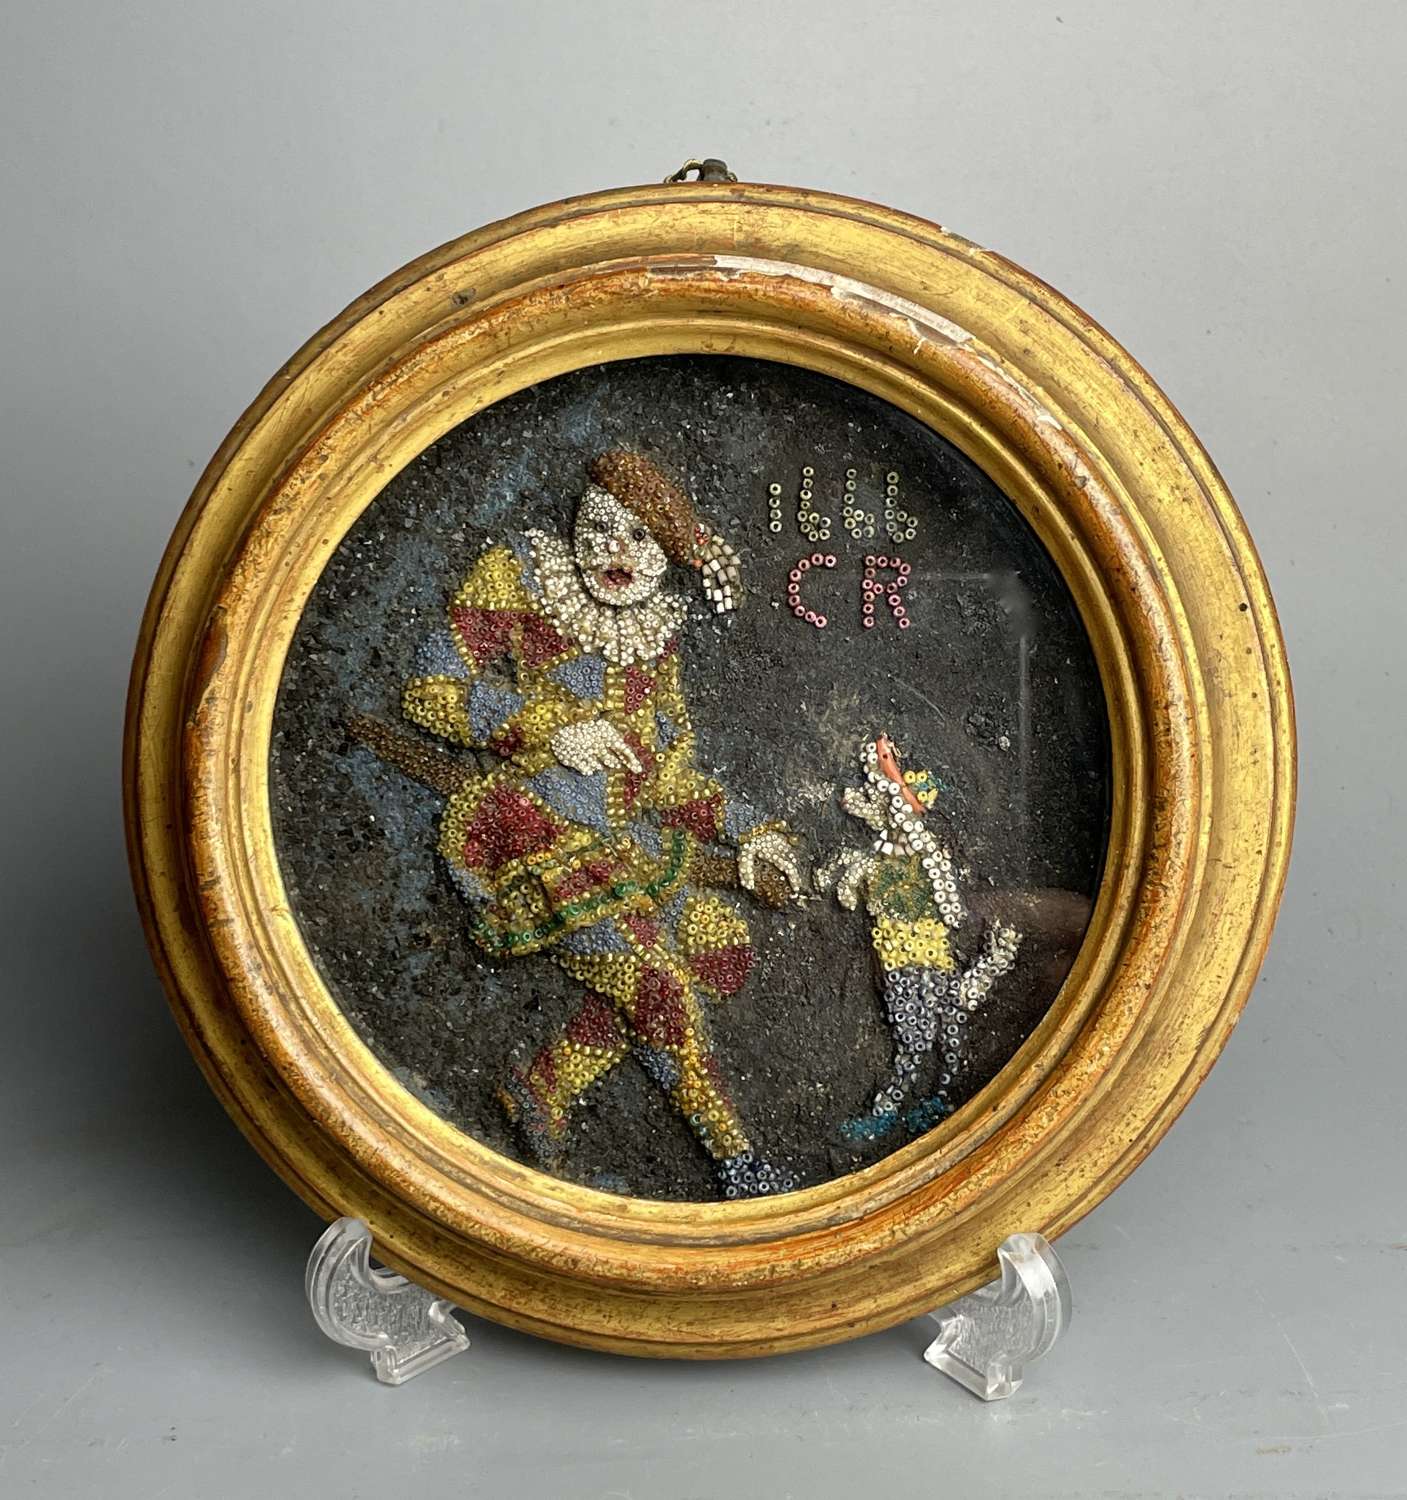 Unusual 19th Century Beadwork Diorama of a Harlequin with a Dog